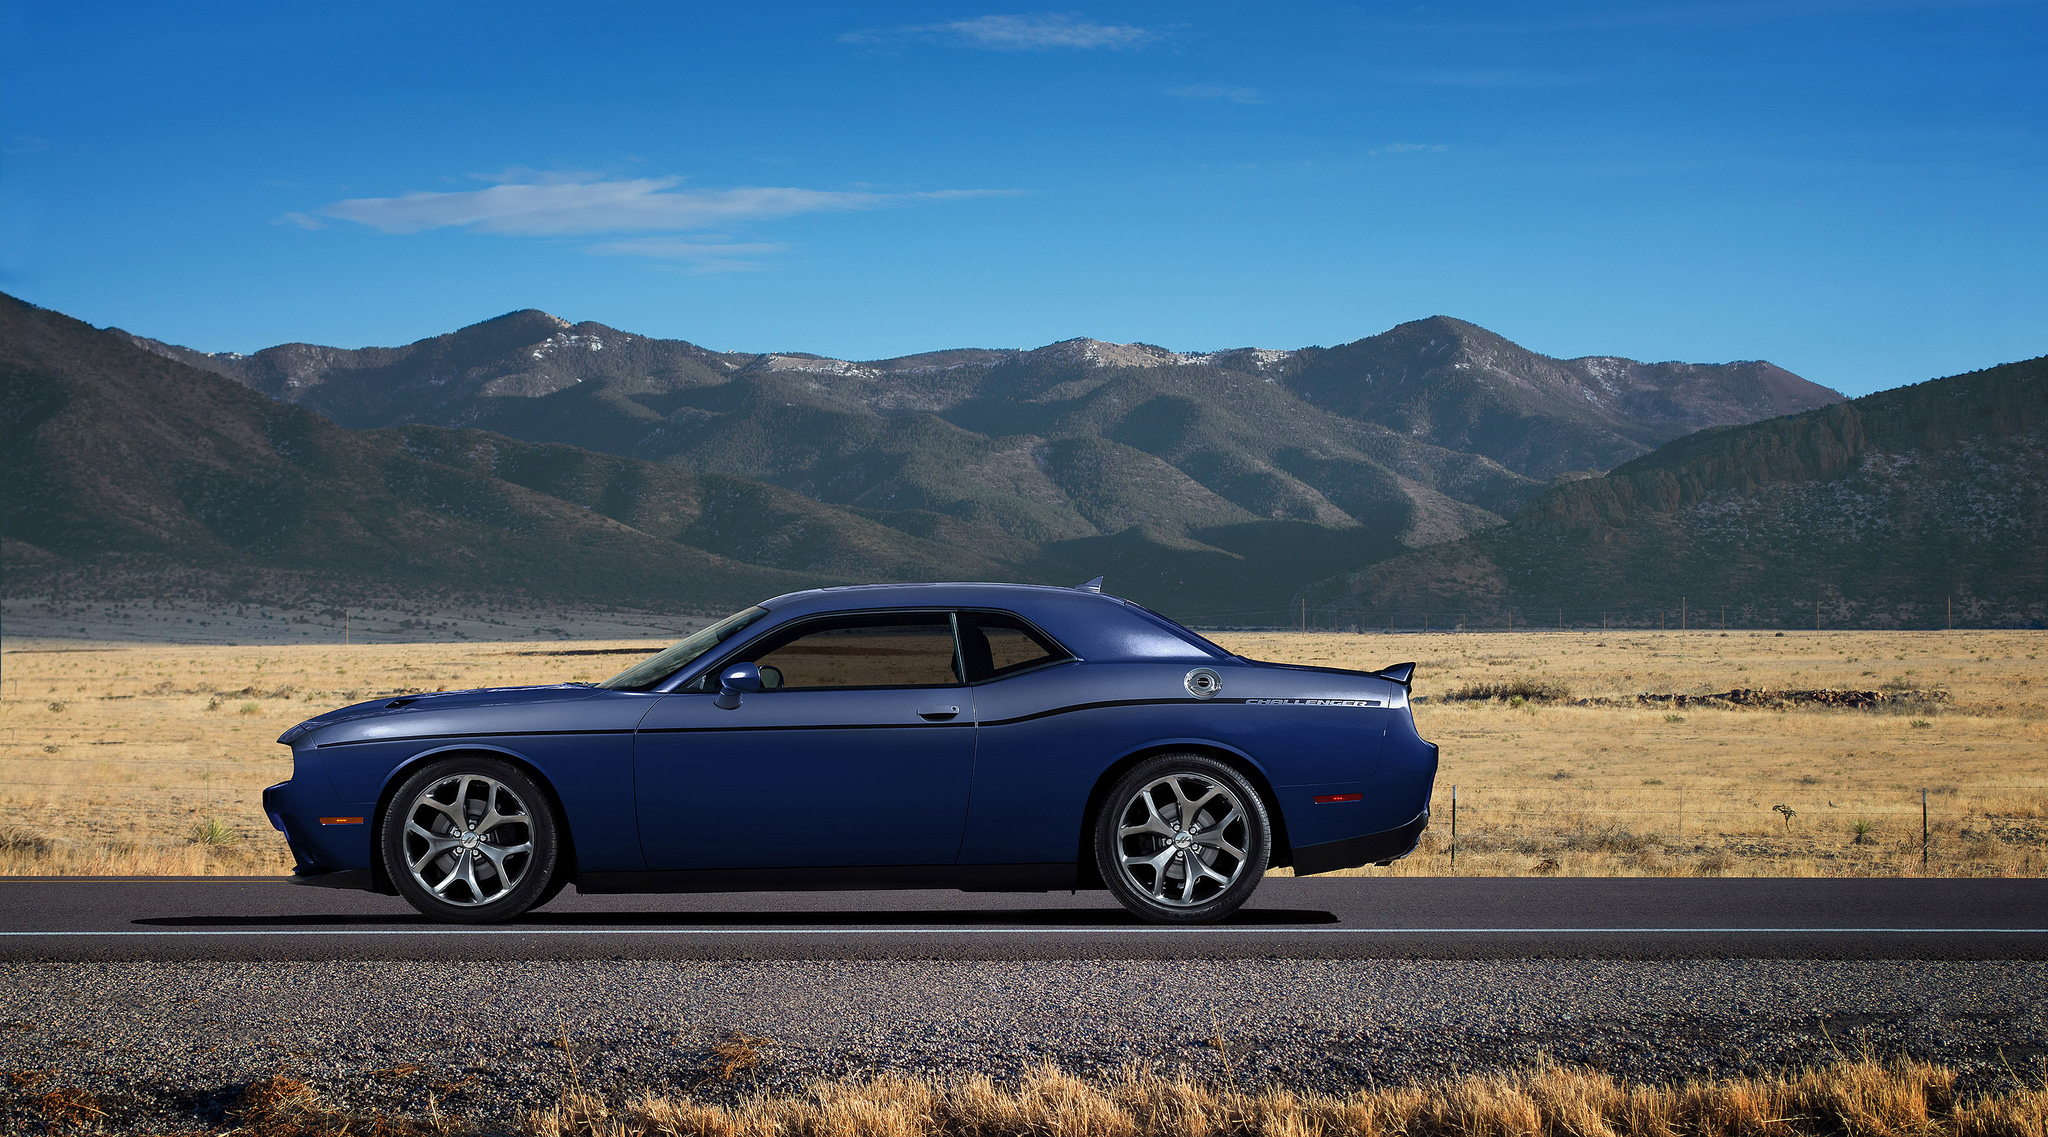 2018 Dodge Challenger SXT Delivers Sporty Performance Without Busting